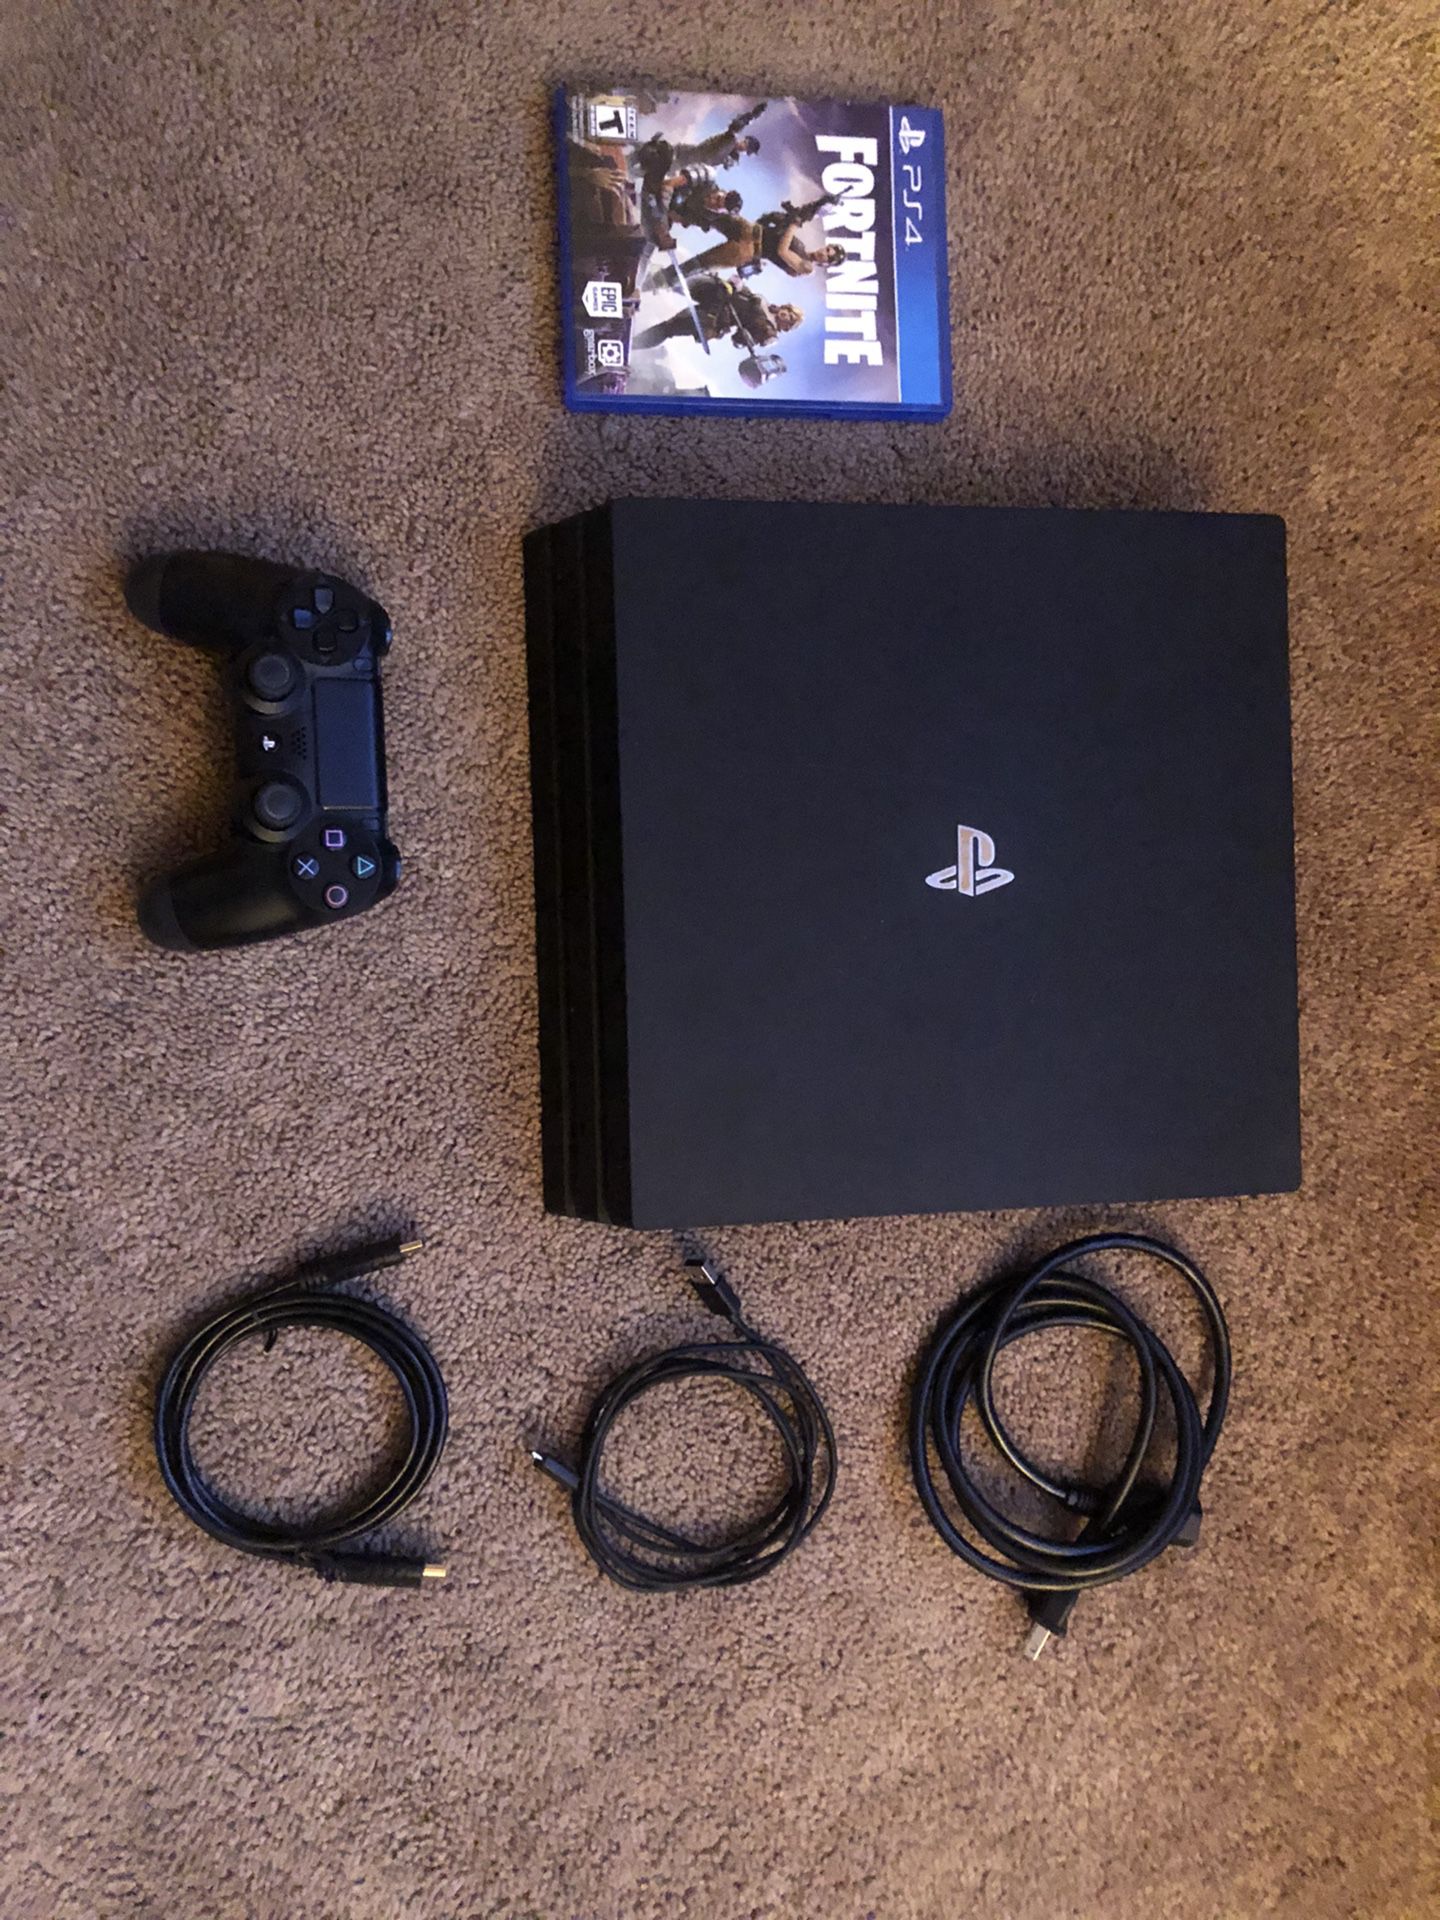 Ps4 Pro 1TB- fortnite (hard copy used)-1 controller